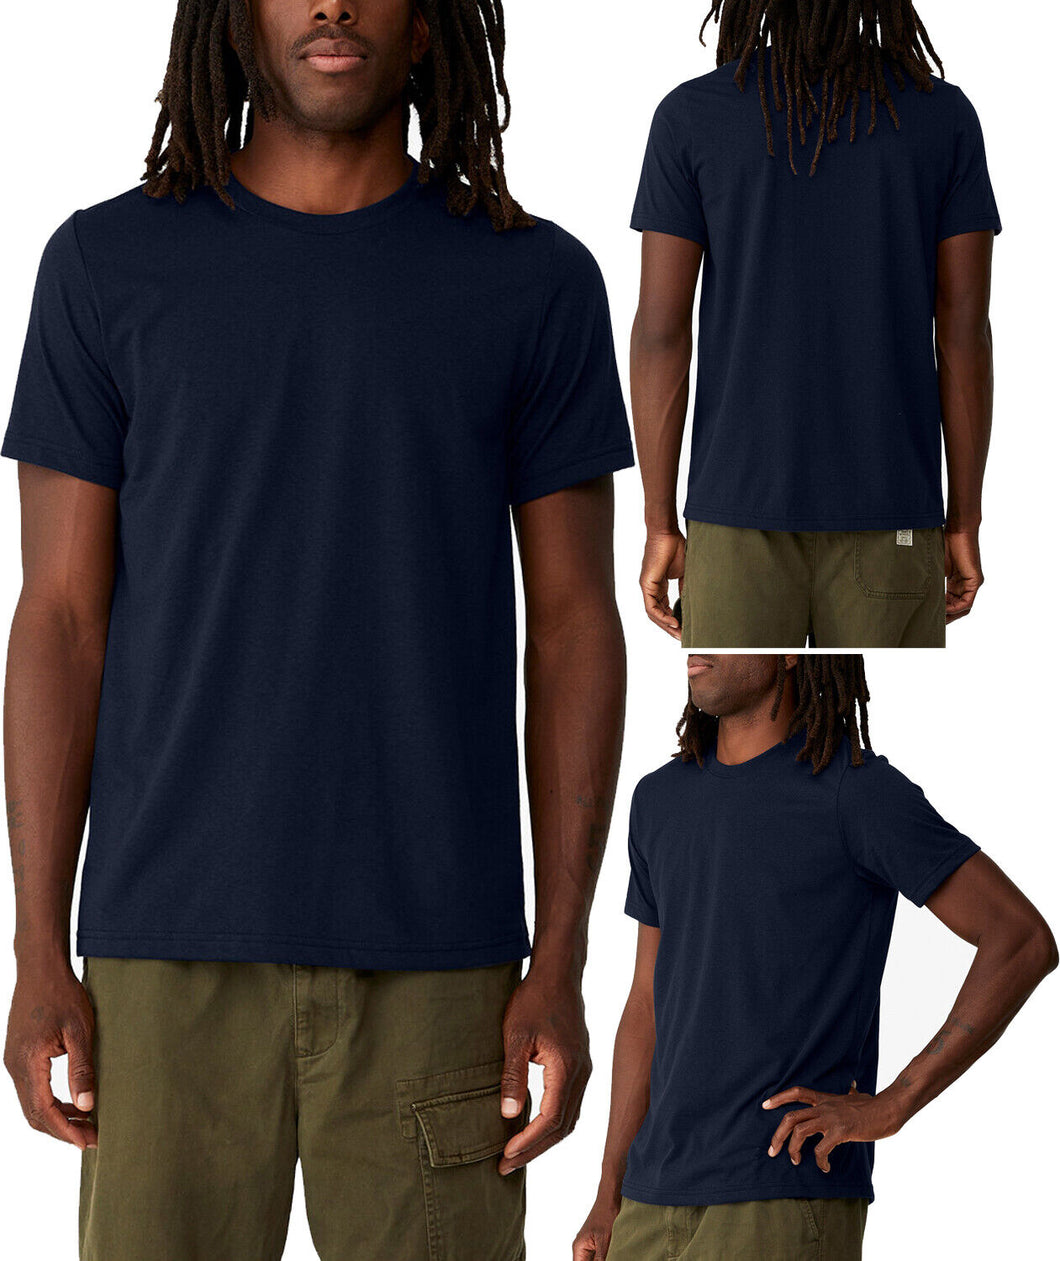 Mens Eco Sustainably Produce Super Soft Blended Ring Spun Cotton Tee XS-3X NEW!